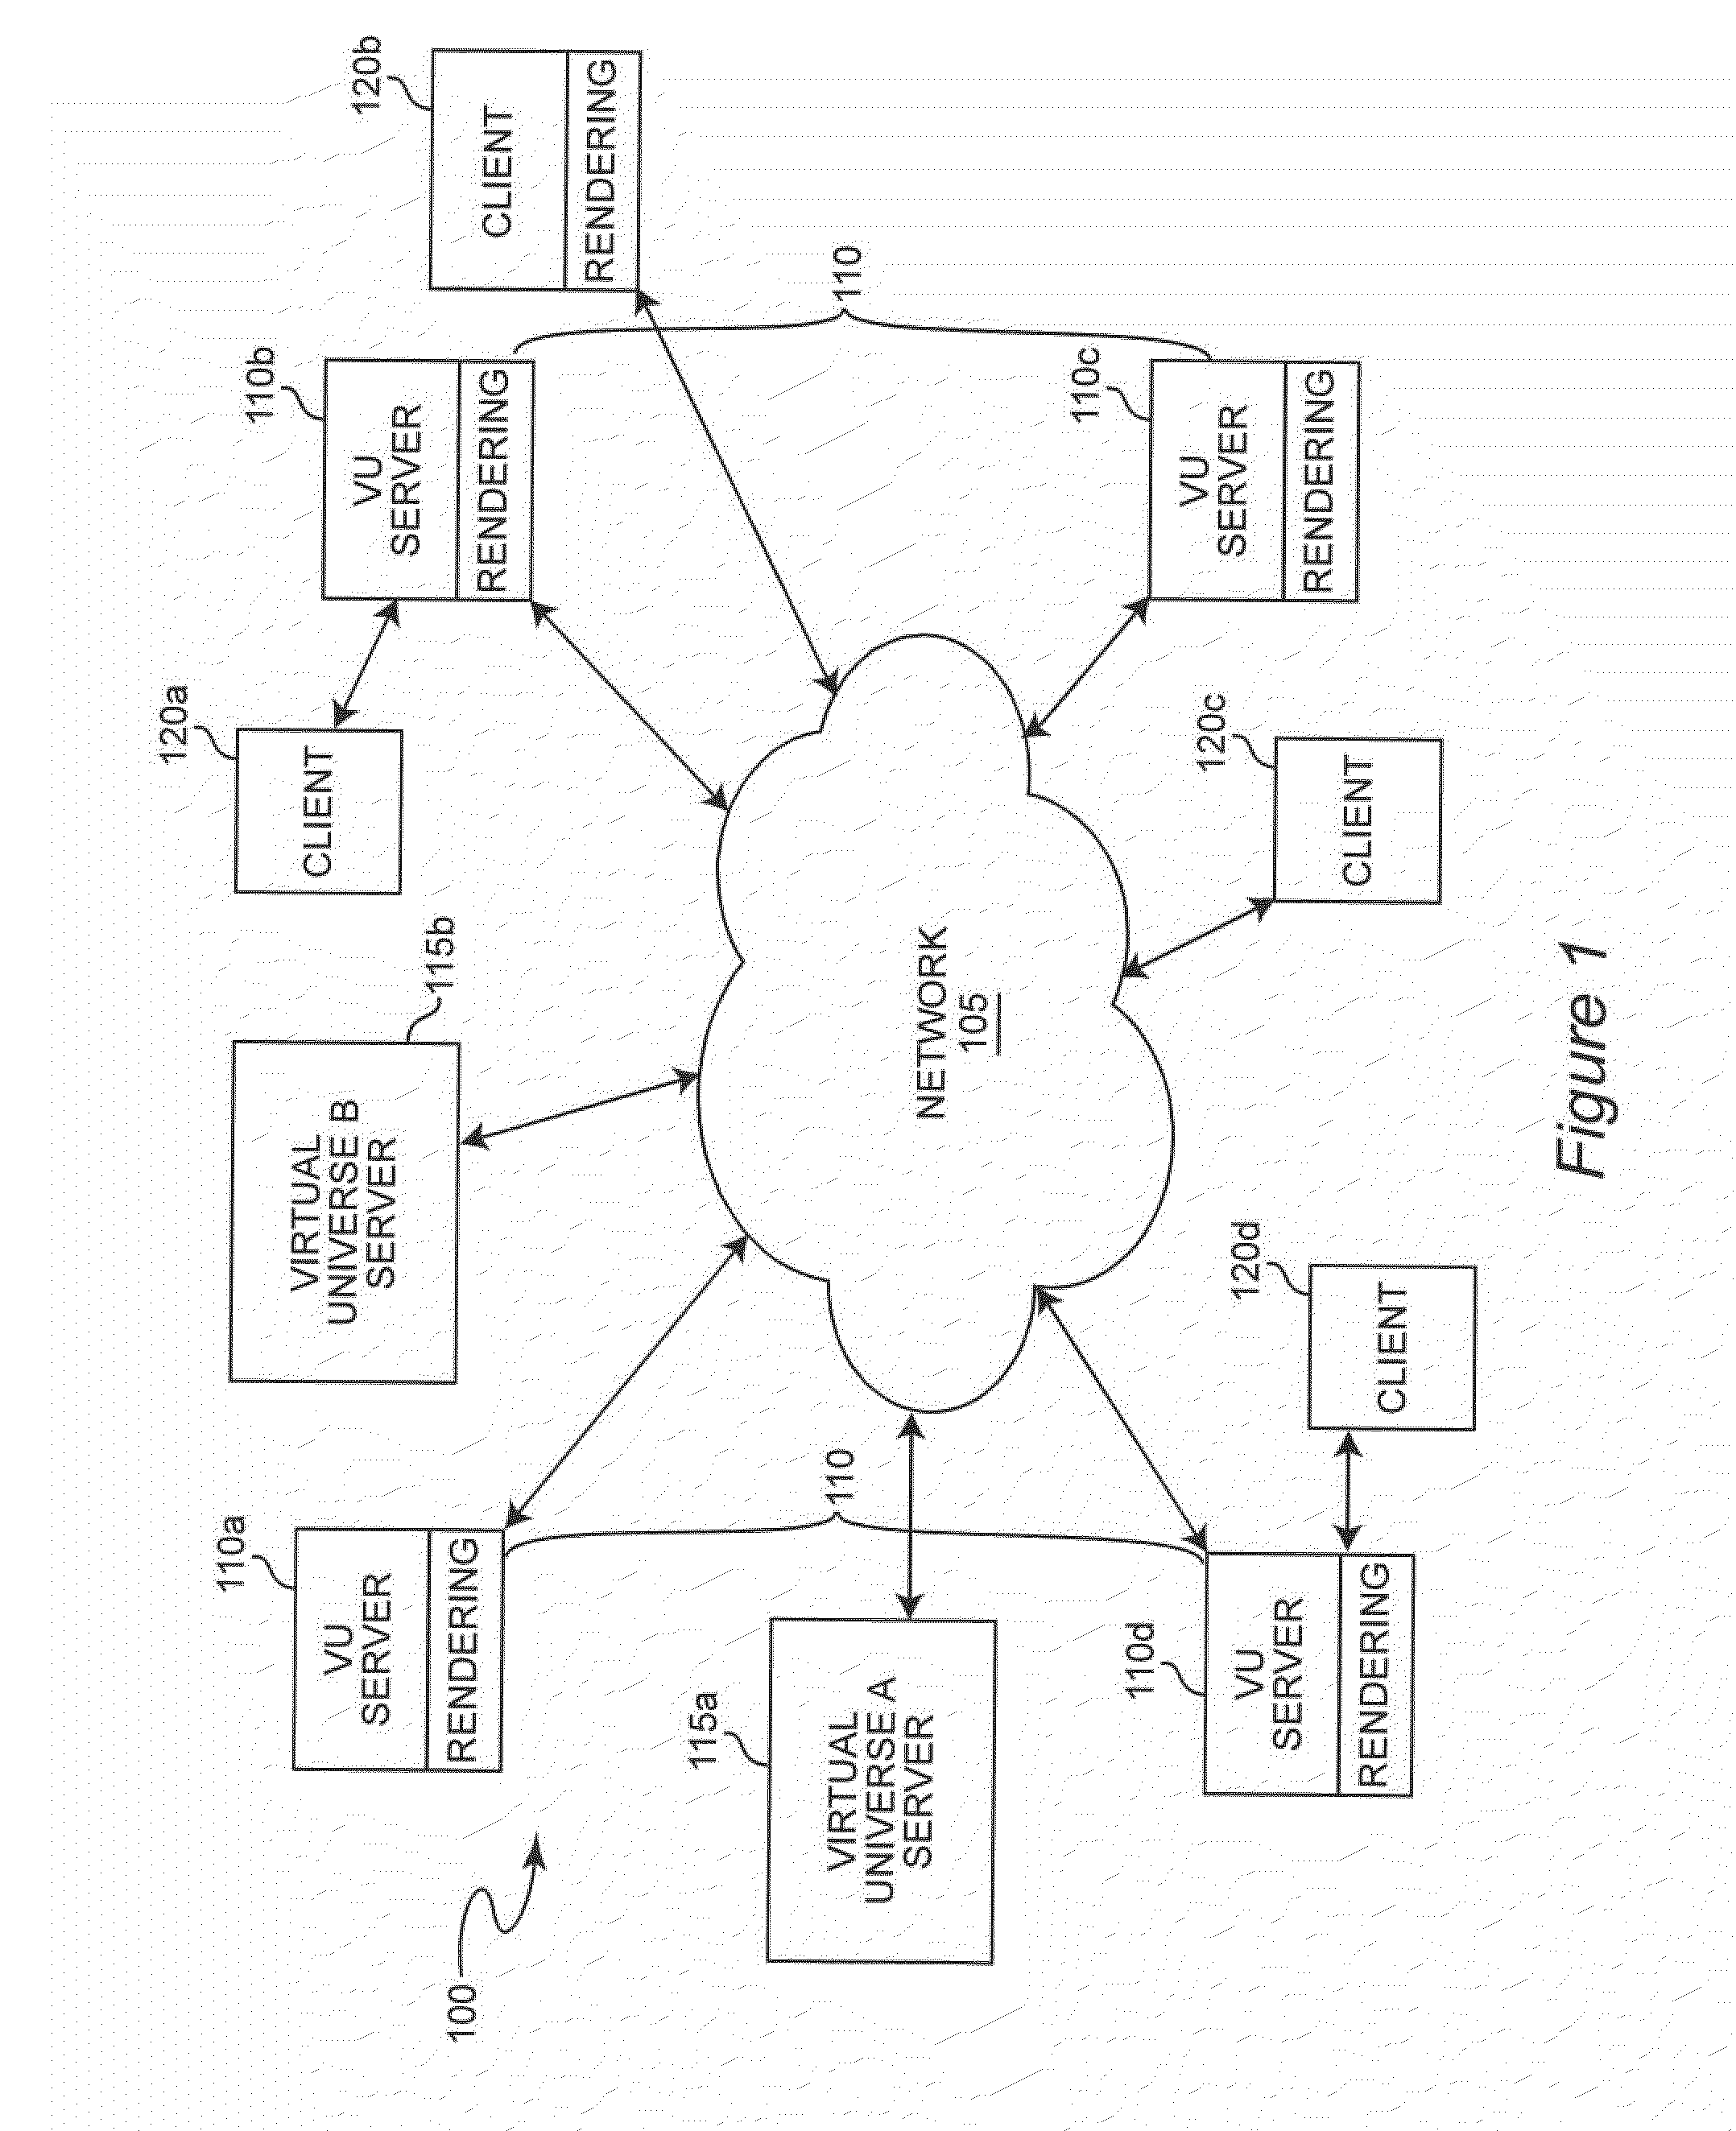 System and Method for Using Partial Teleportation or Relocation in Virtual Worlds